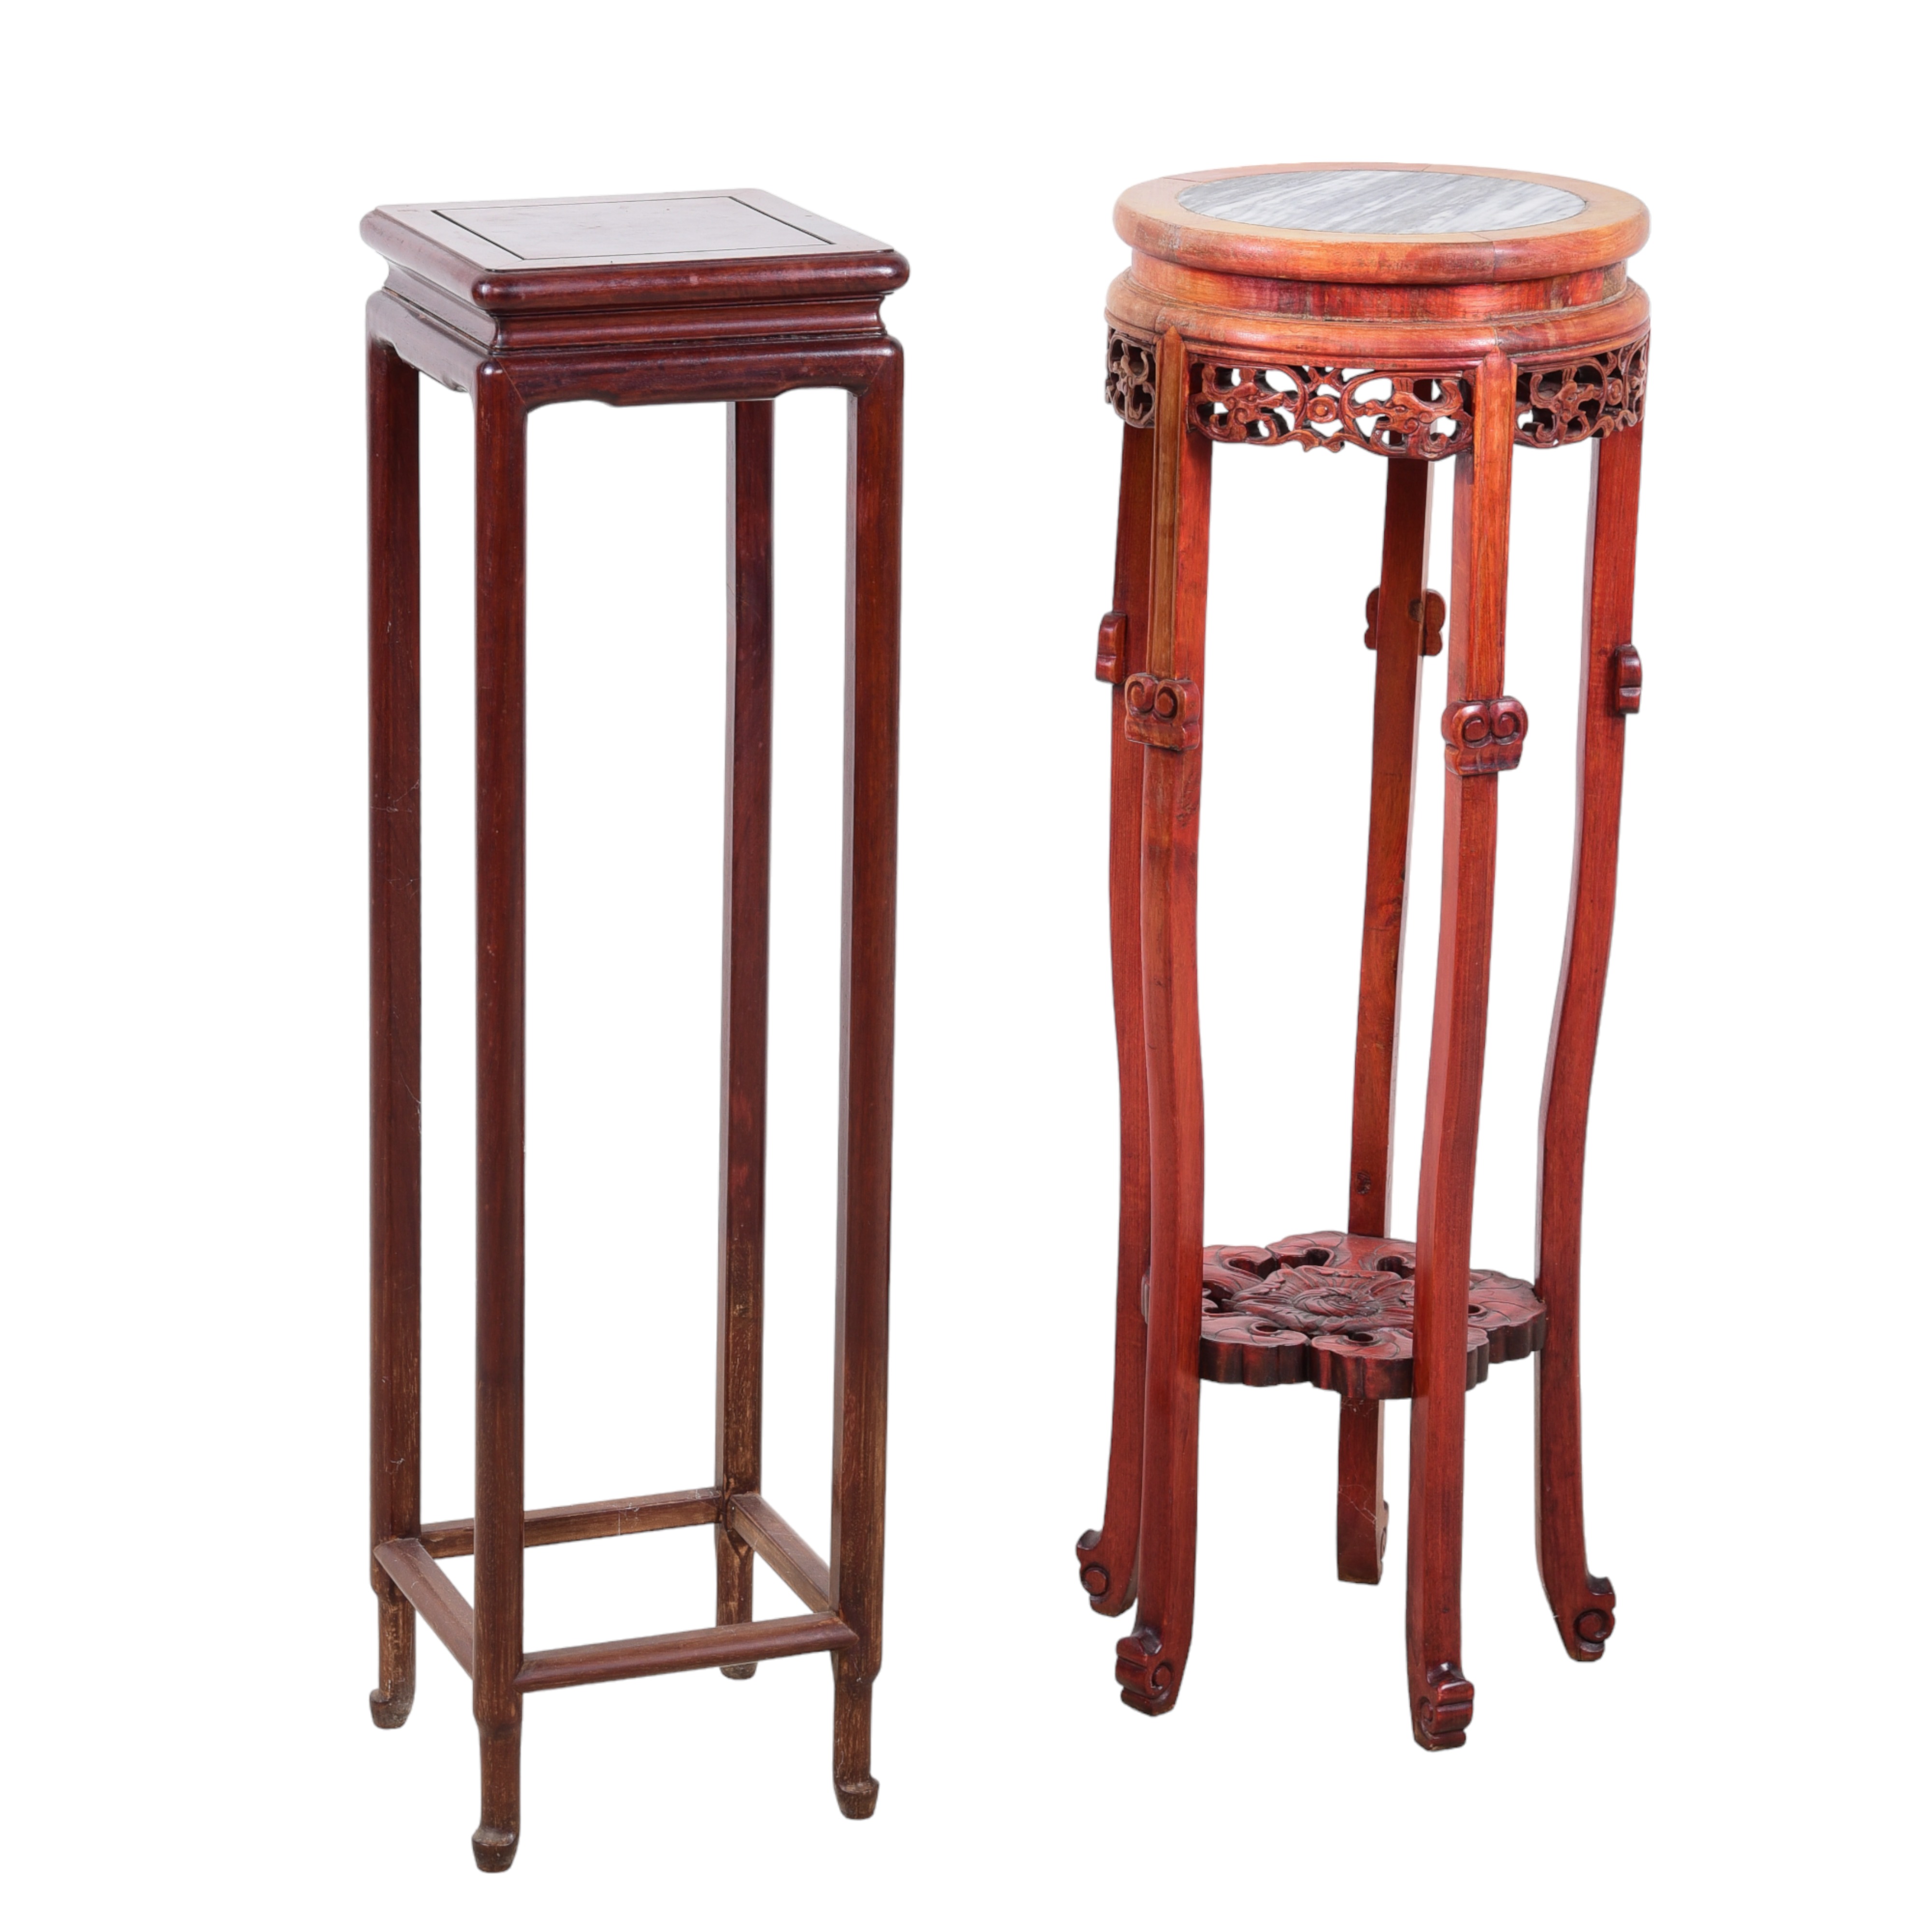 (2) Chinese pedestals, c/o inset